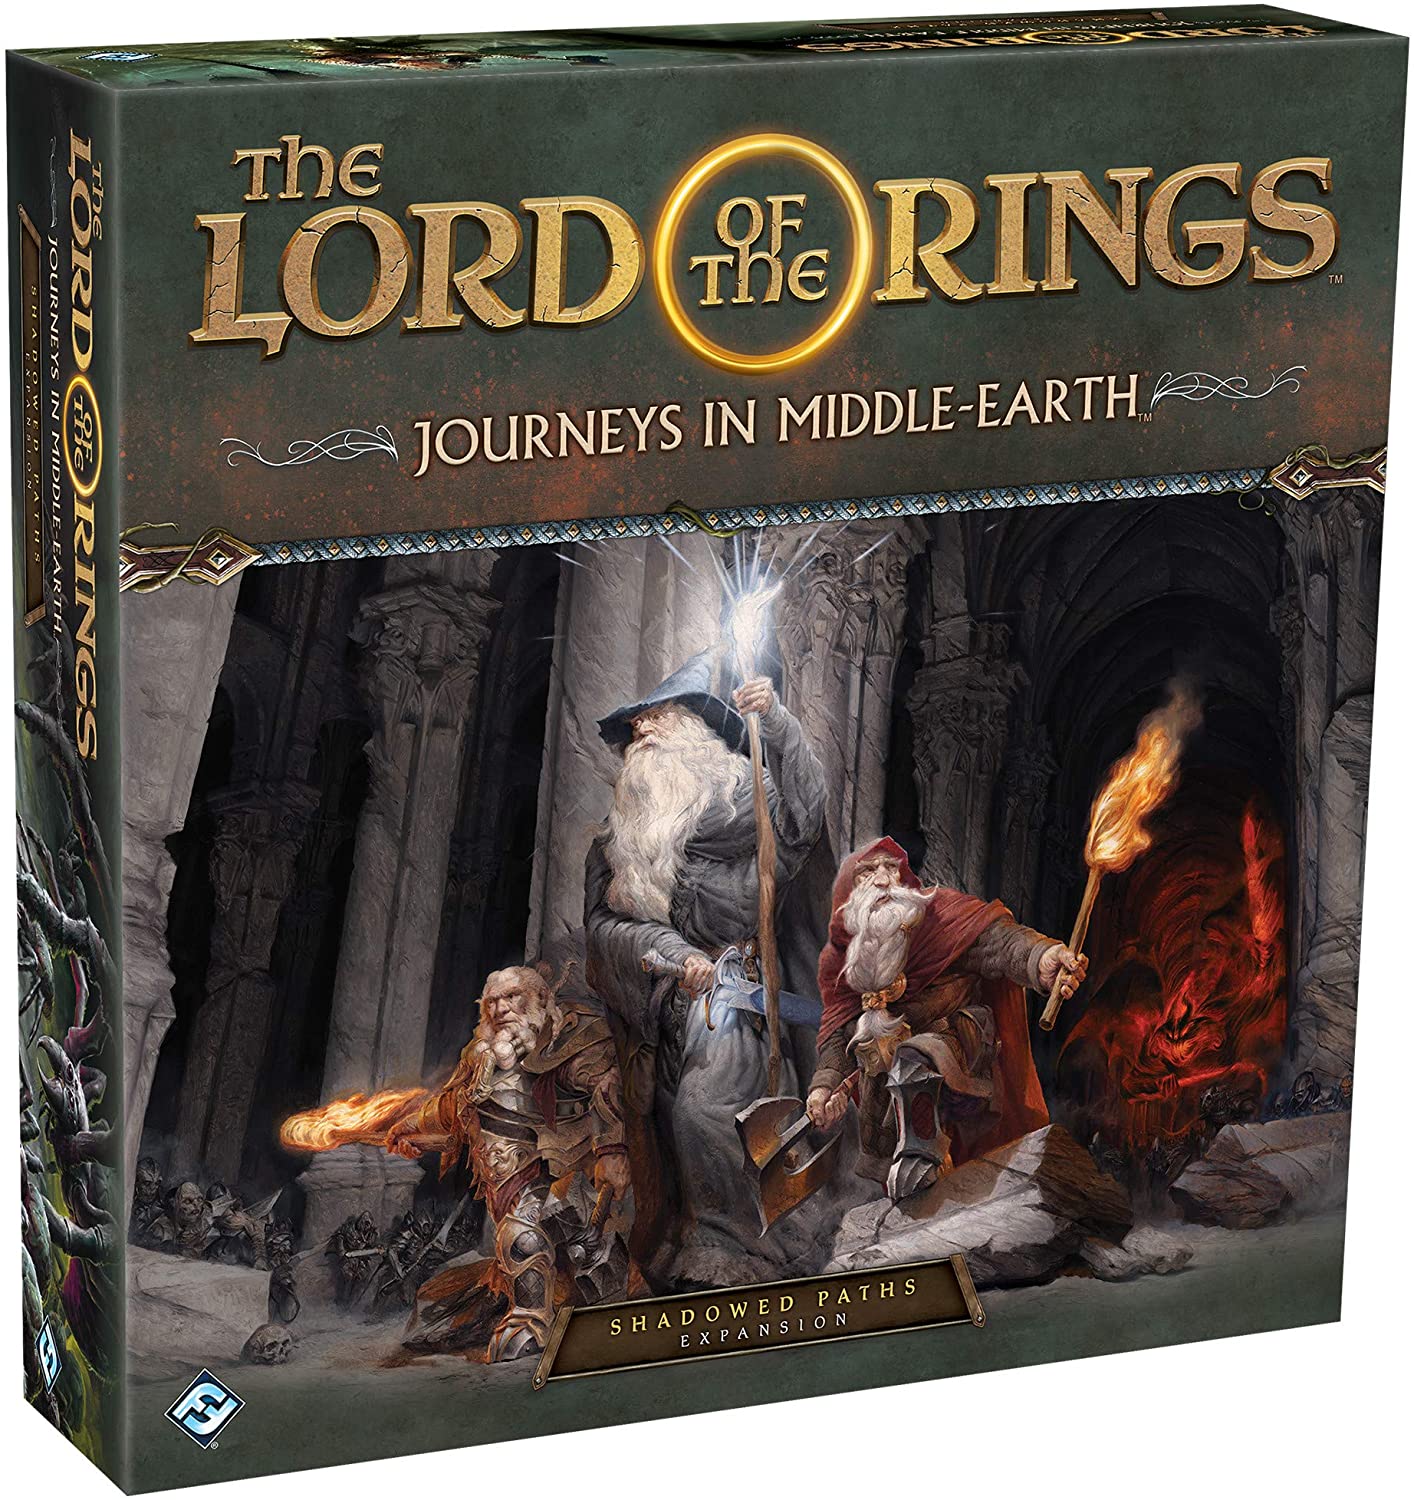 The Lord of the Rings: Journeys in Middle Earth - Shadowed Paths Expansion